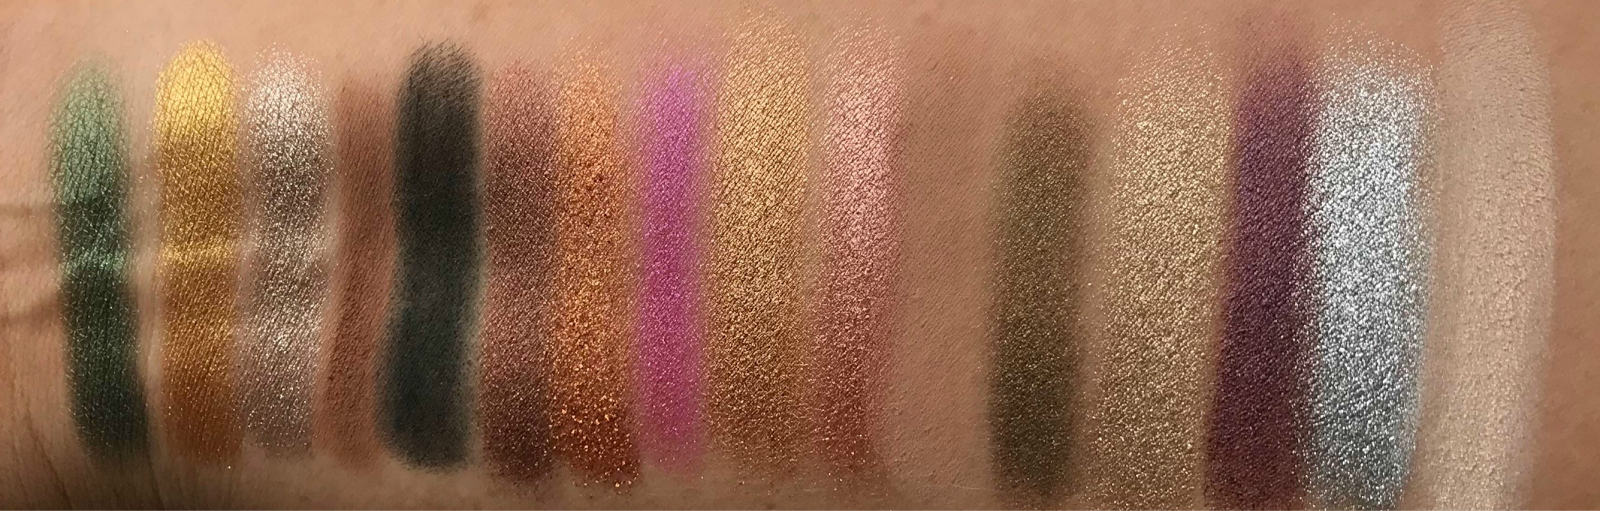 Too Faced Chocolate Gold Palette Swatches